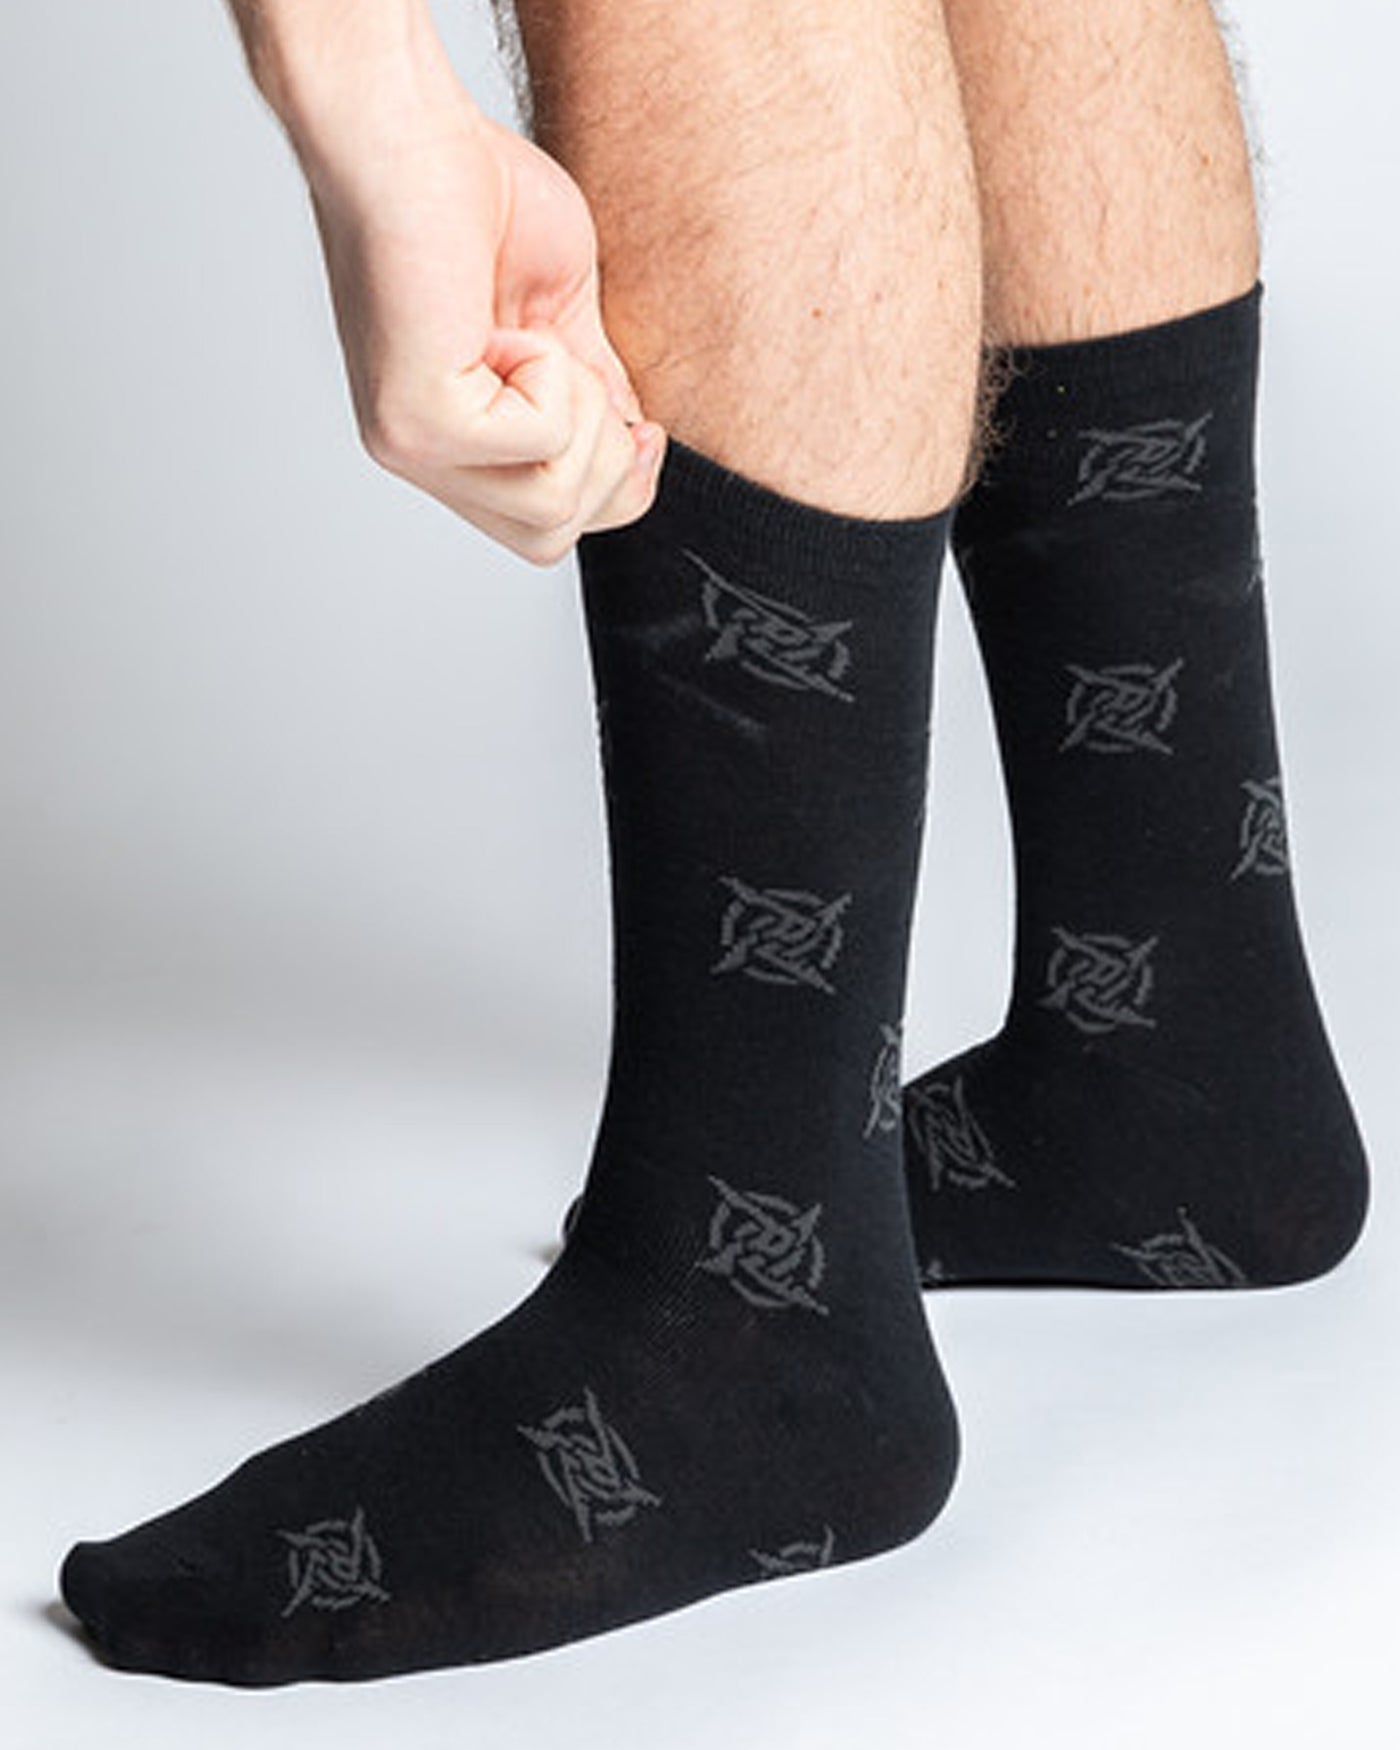 A pair of classic black socks with the Ninjas in Pyjamas logo from NIP merch collection. These comfortable and stylish socks are designed to represent your passion for NIP while adding a touch of ninja-inspired flair to your everyday outfit.